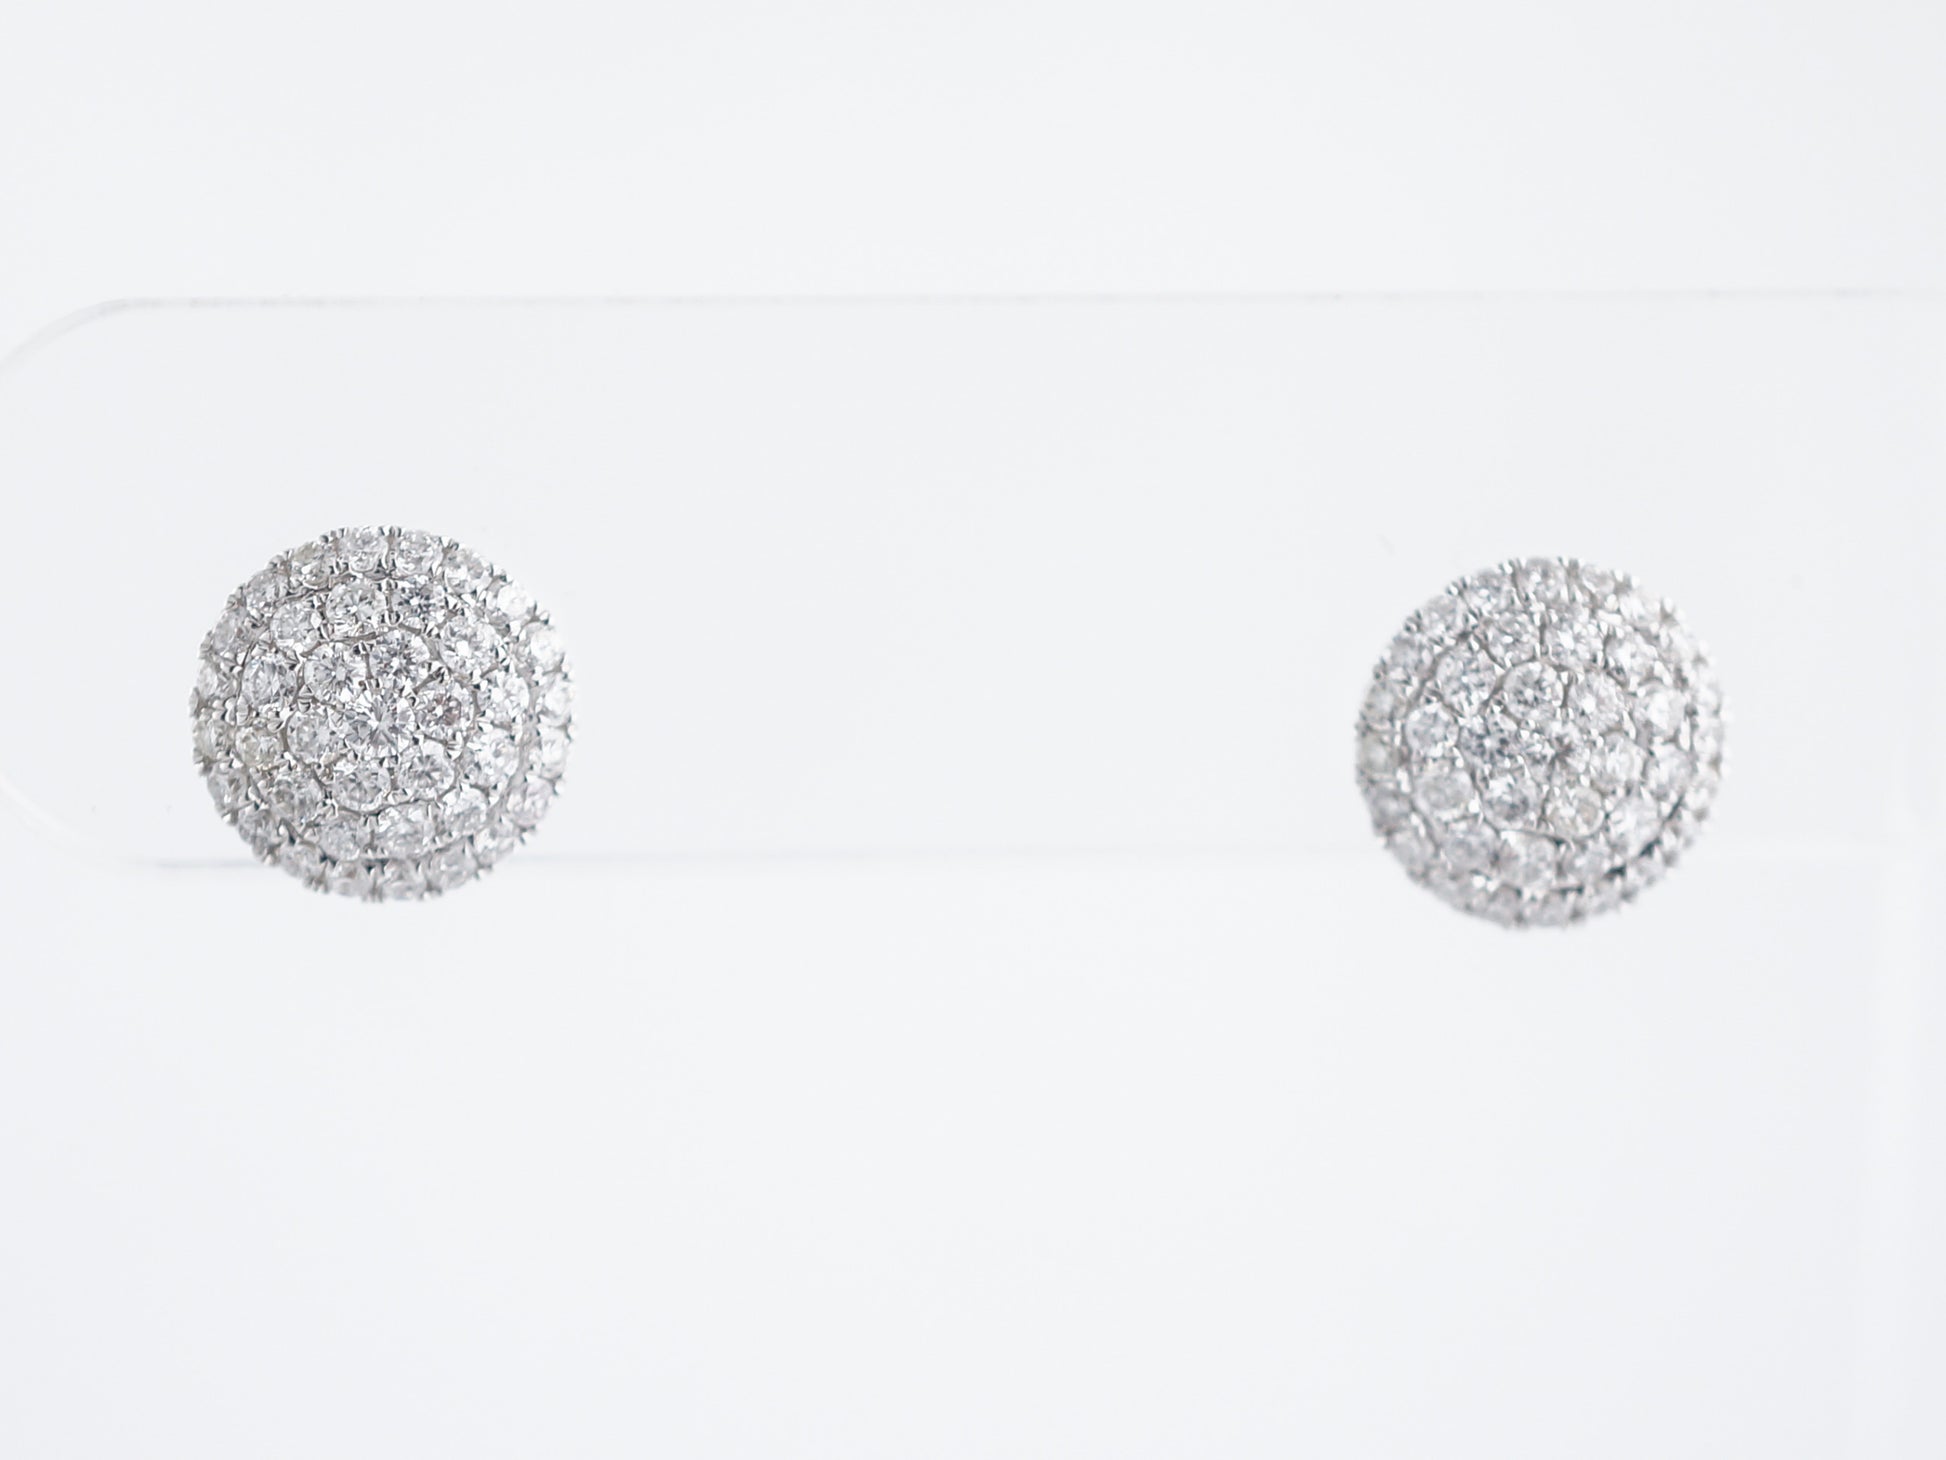 Pave Disc Earrings Modern 1.00 Round Brilliant Cut Diamonds in 14k White Gold